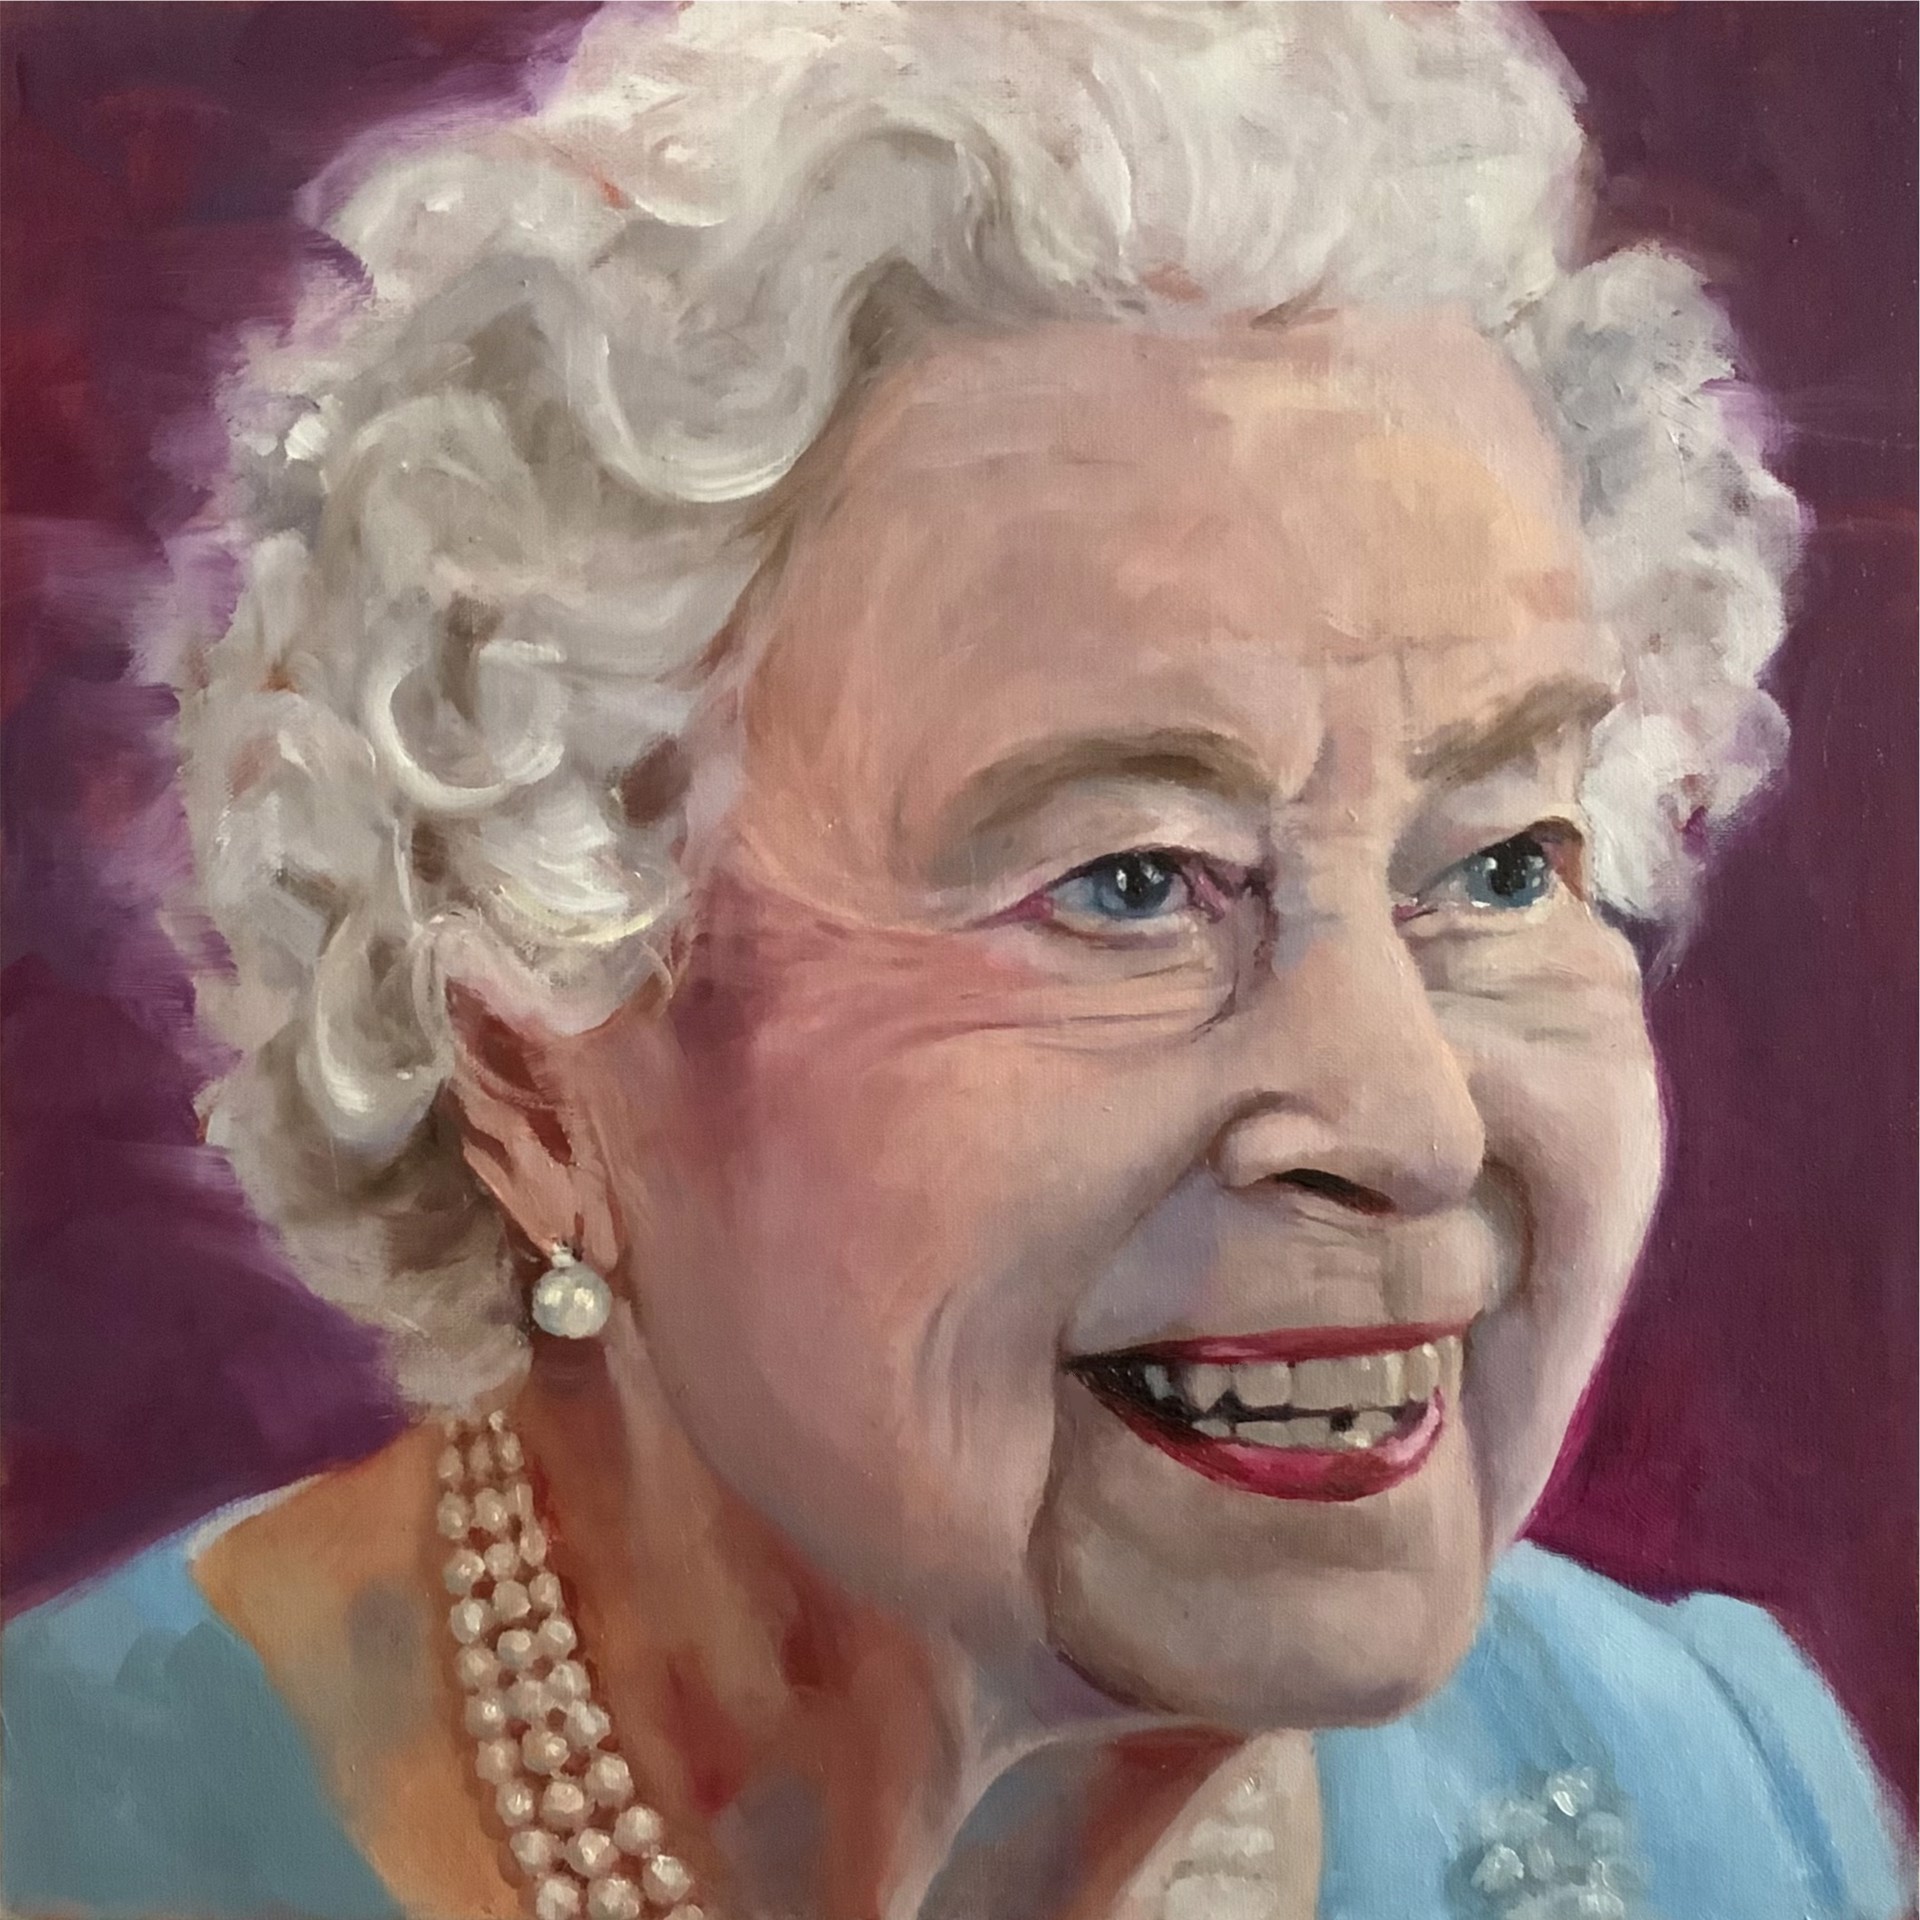 Her Majesty Limited Signed Prints by Charl Adair